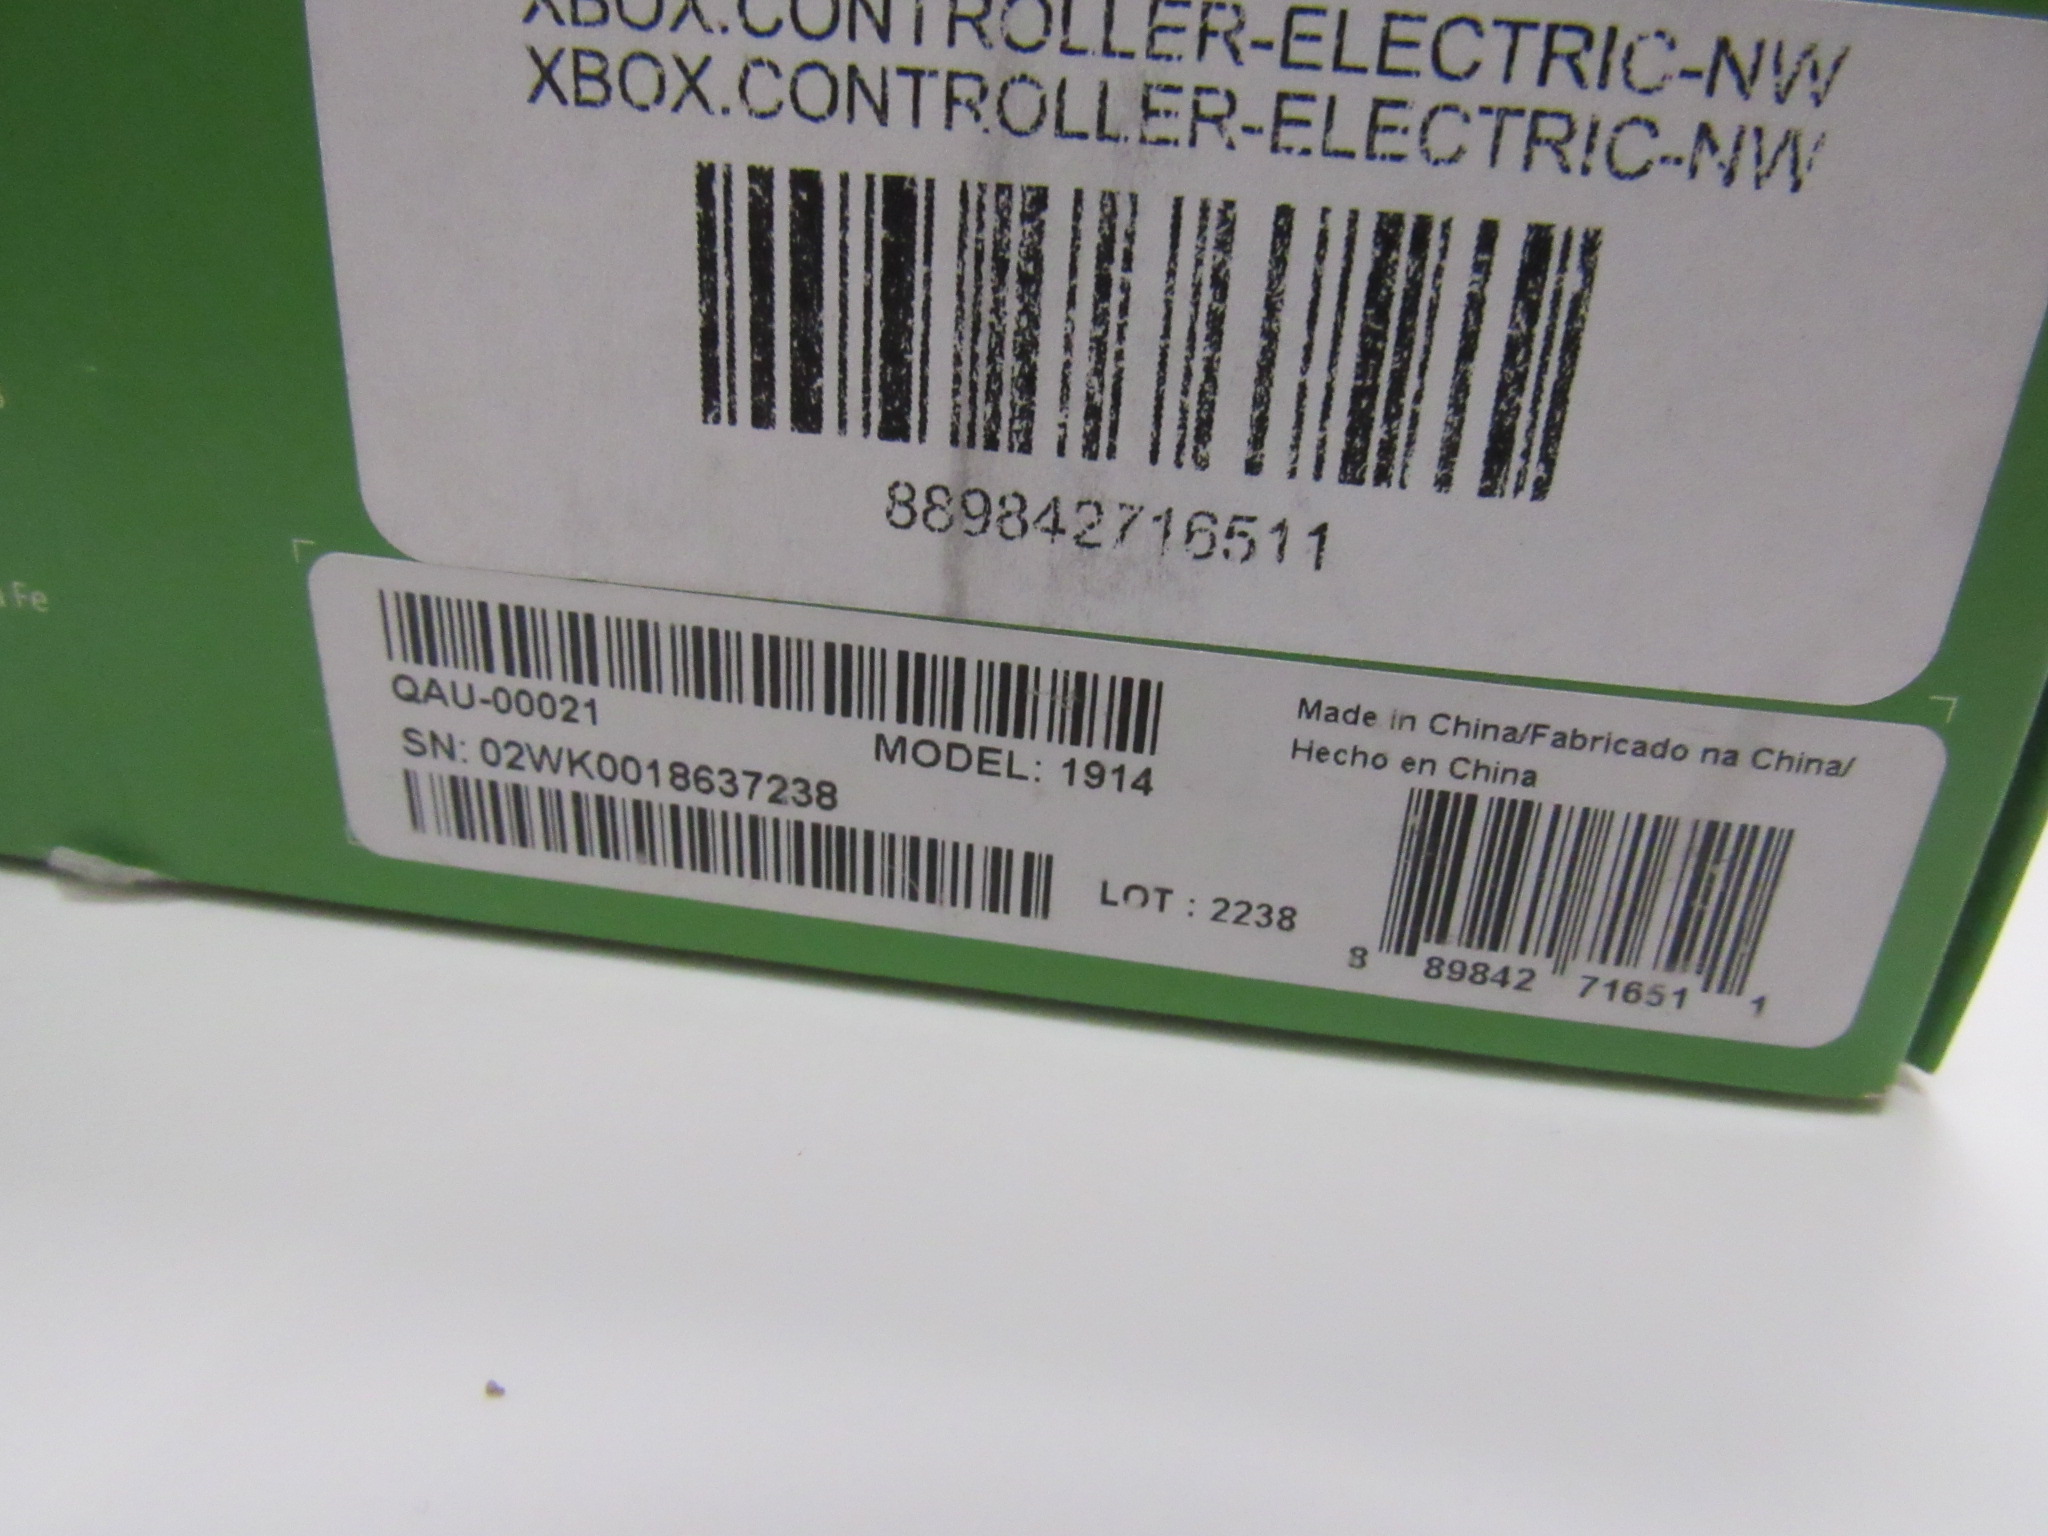 Xbox Series X, S Wireless Controller - Electric Volt 889842716511